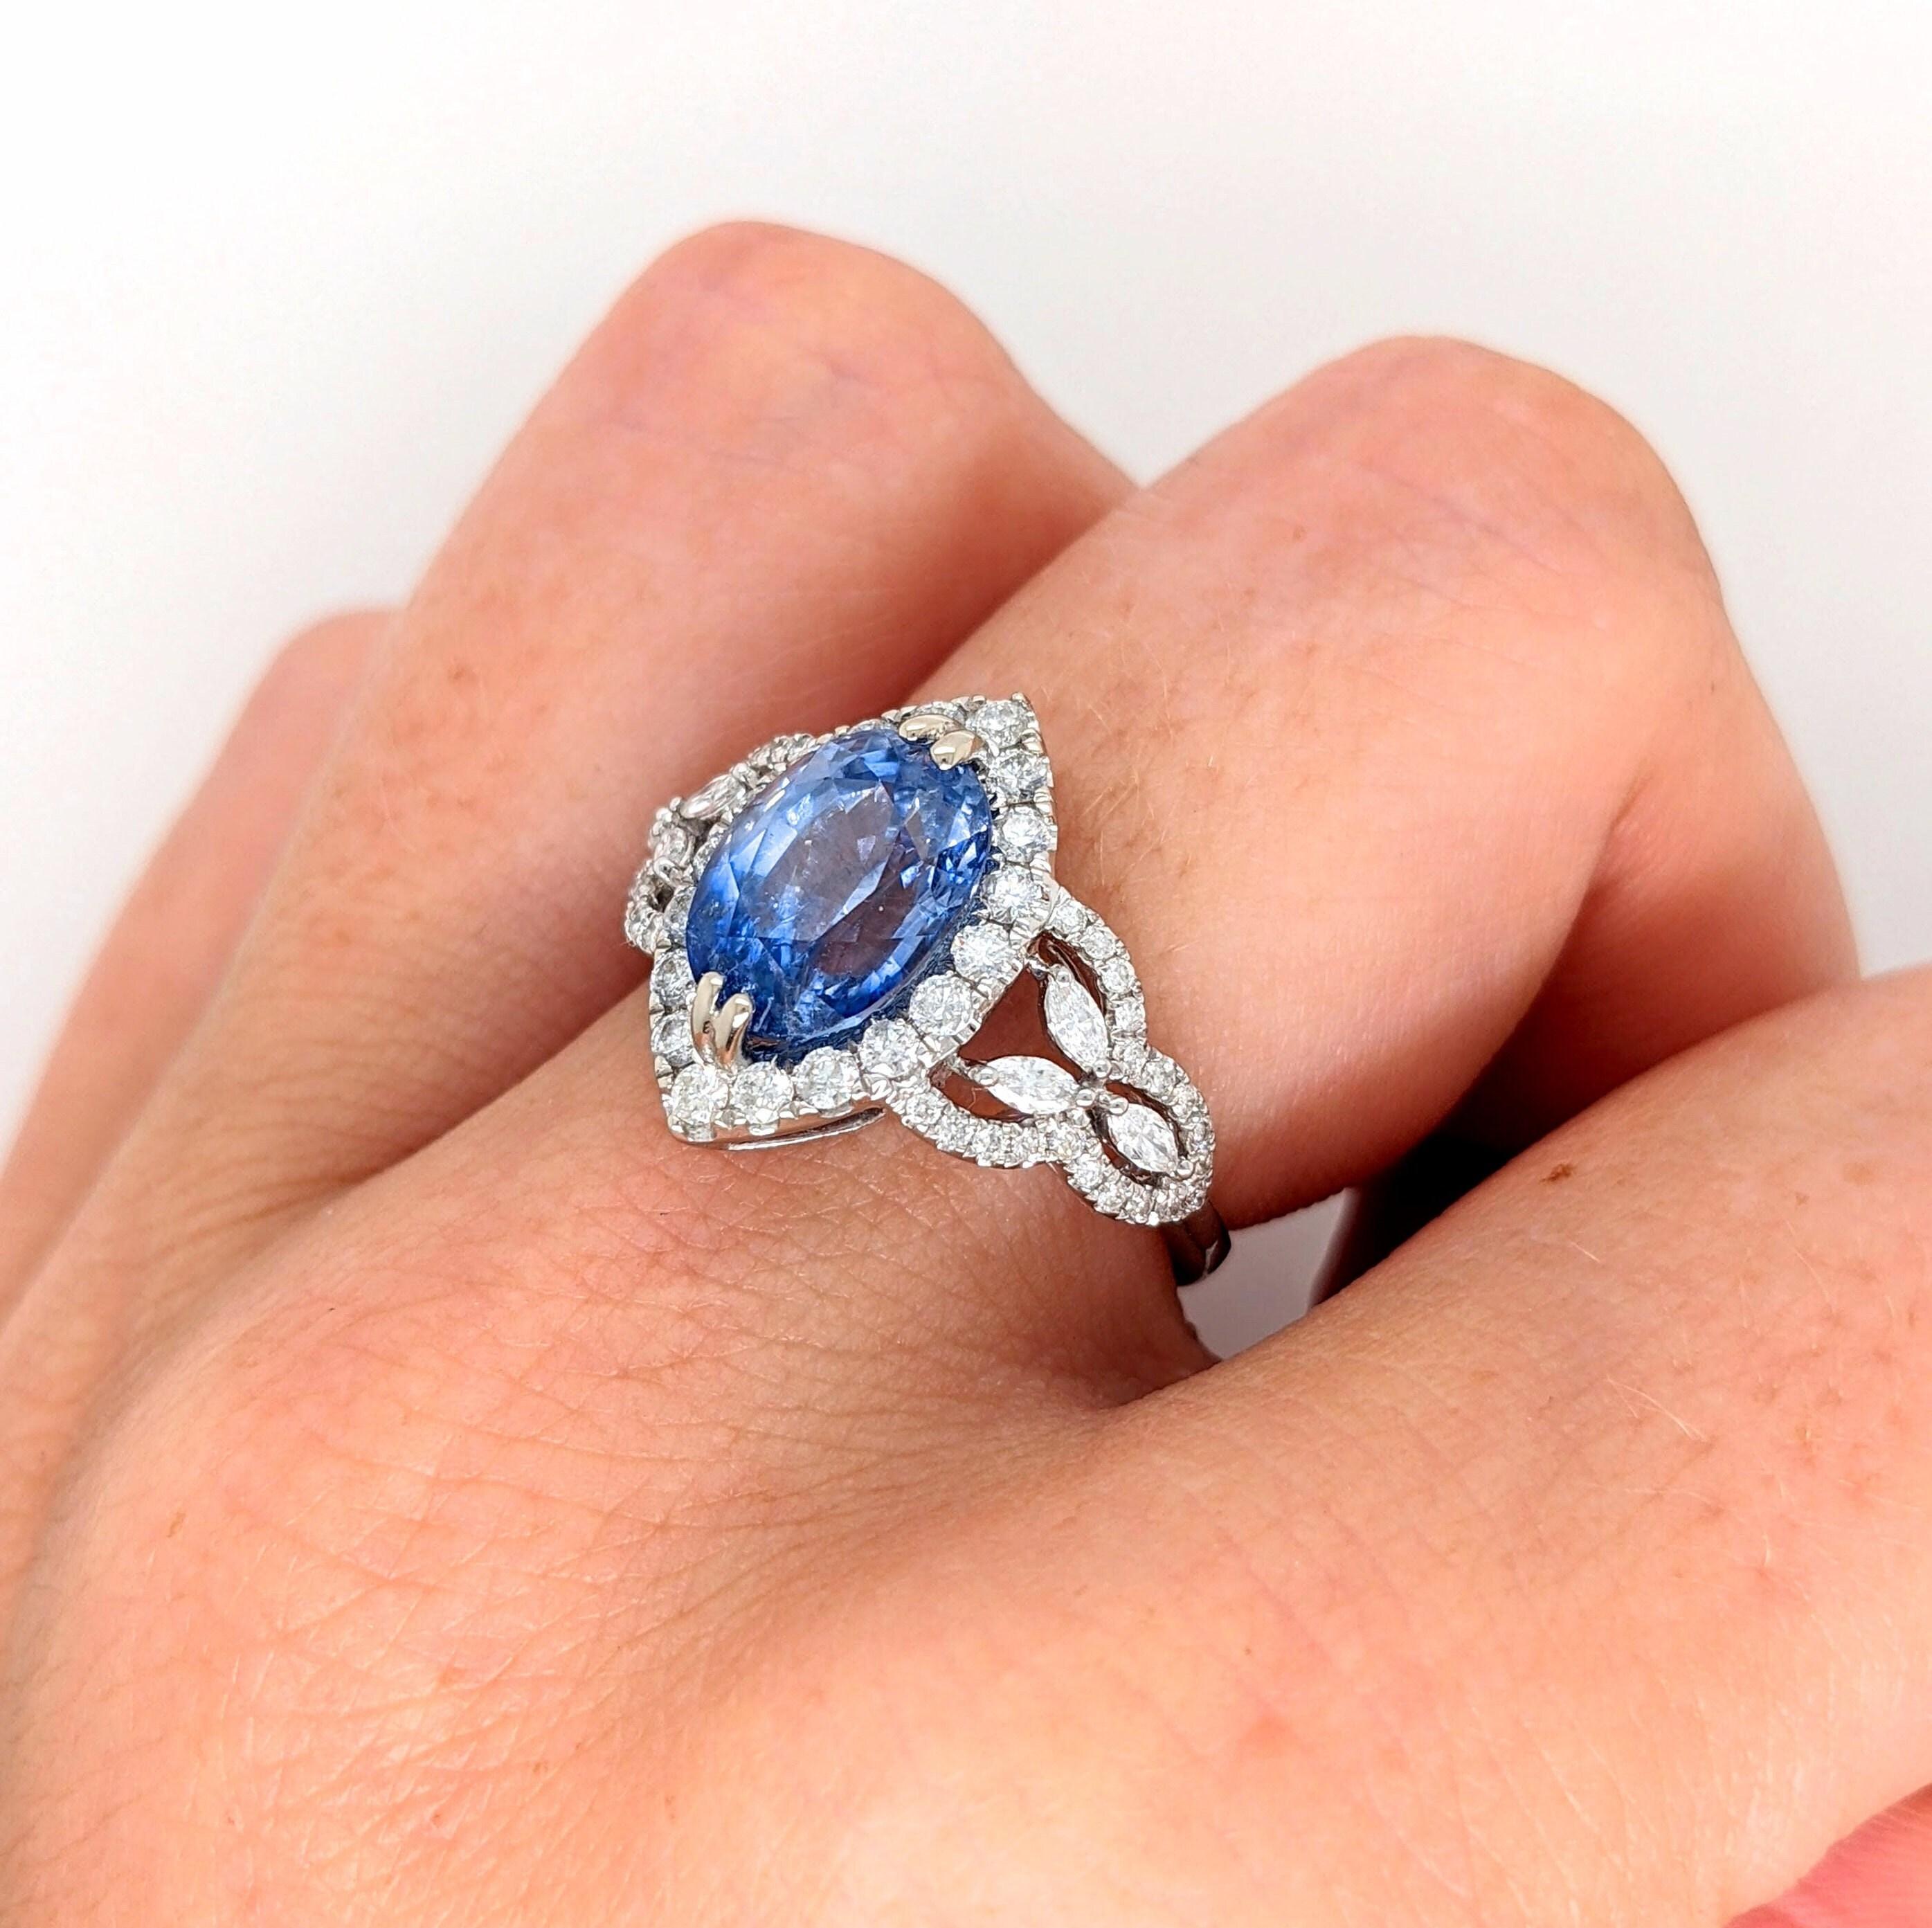 Women's 3.64ct Ceylon Sapphire Ring w Earth Mined Diamonds in Solid 14K Gold MQ 11.7x7mm For Sale